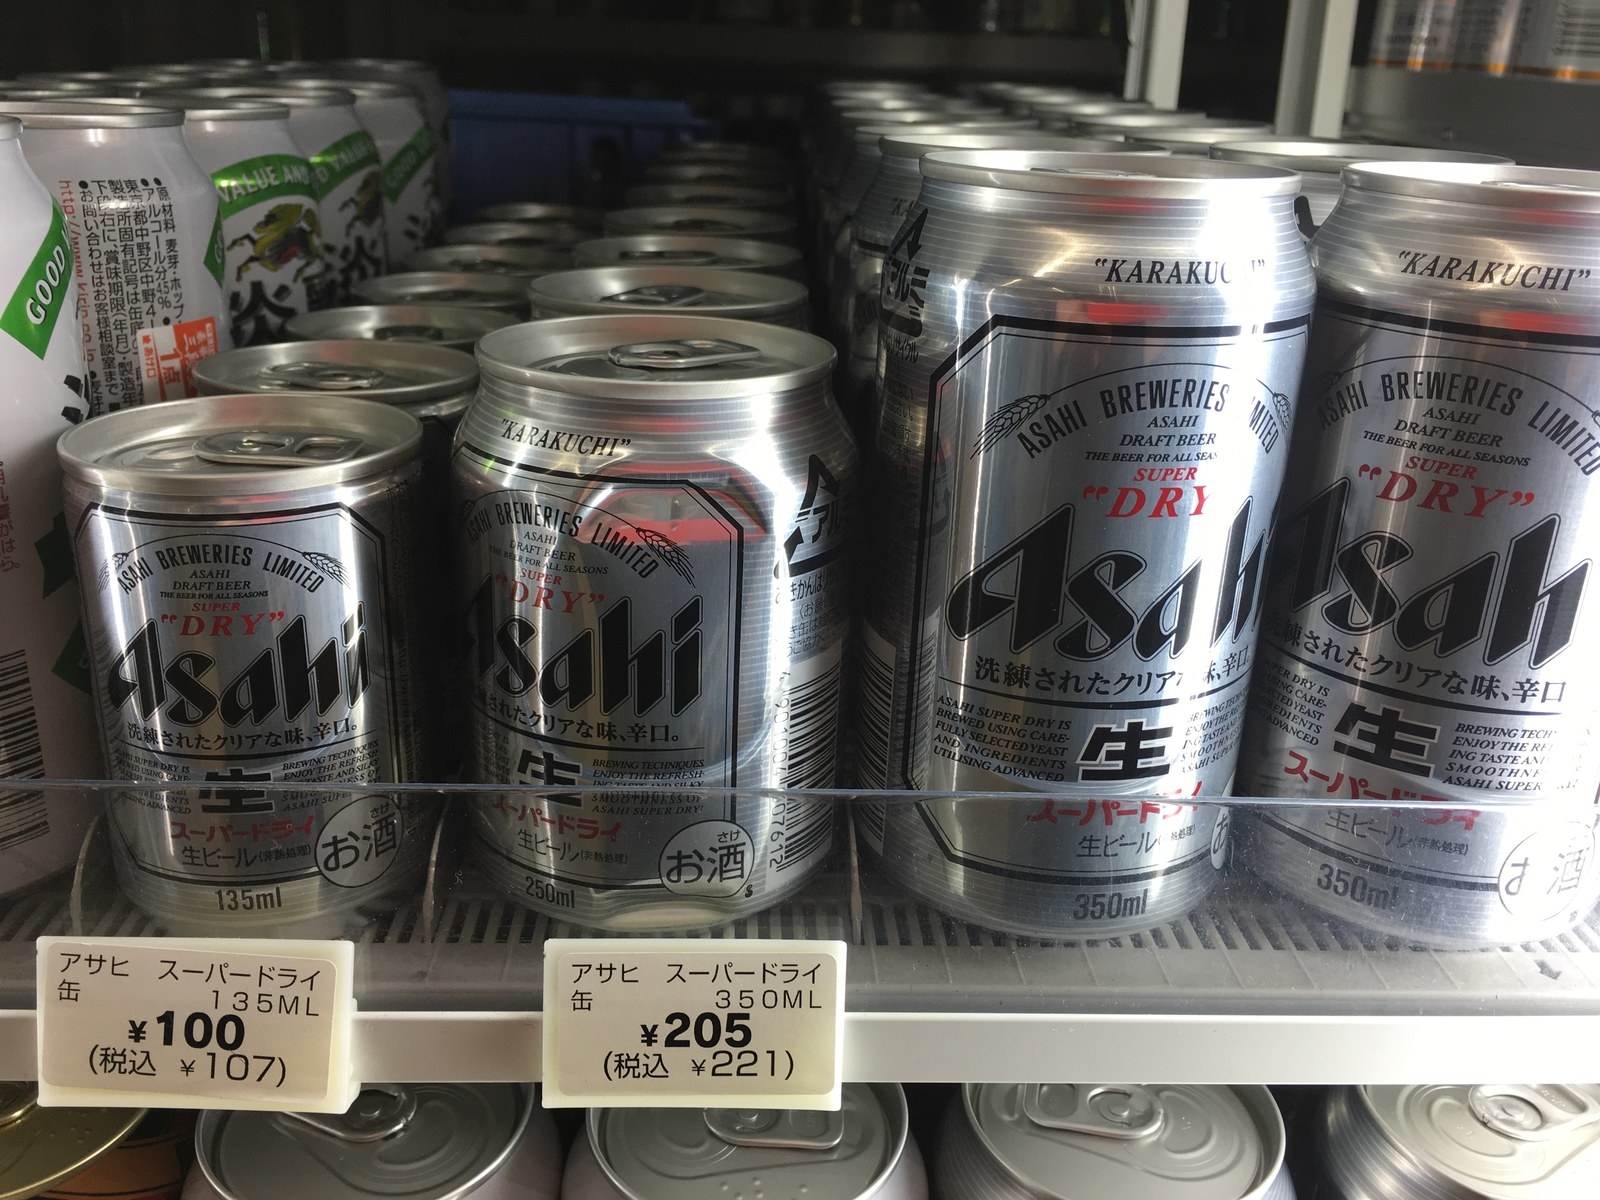 a group of asahi beers